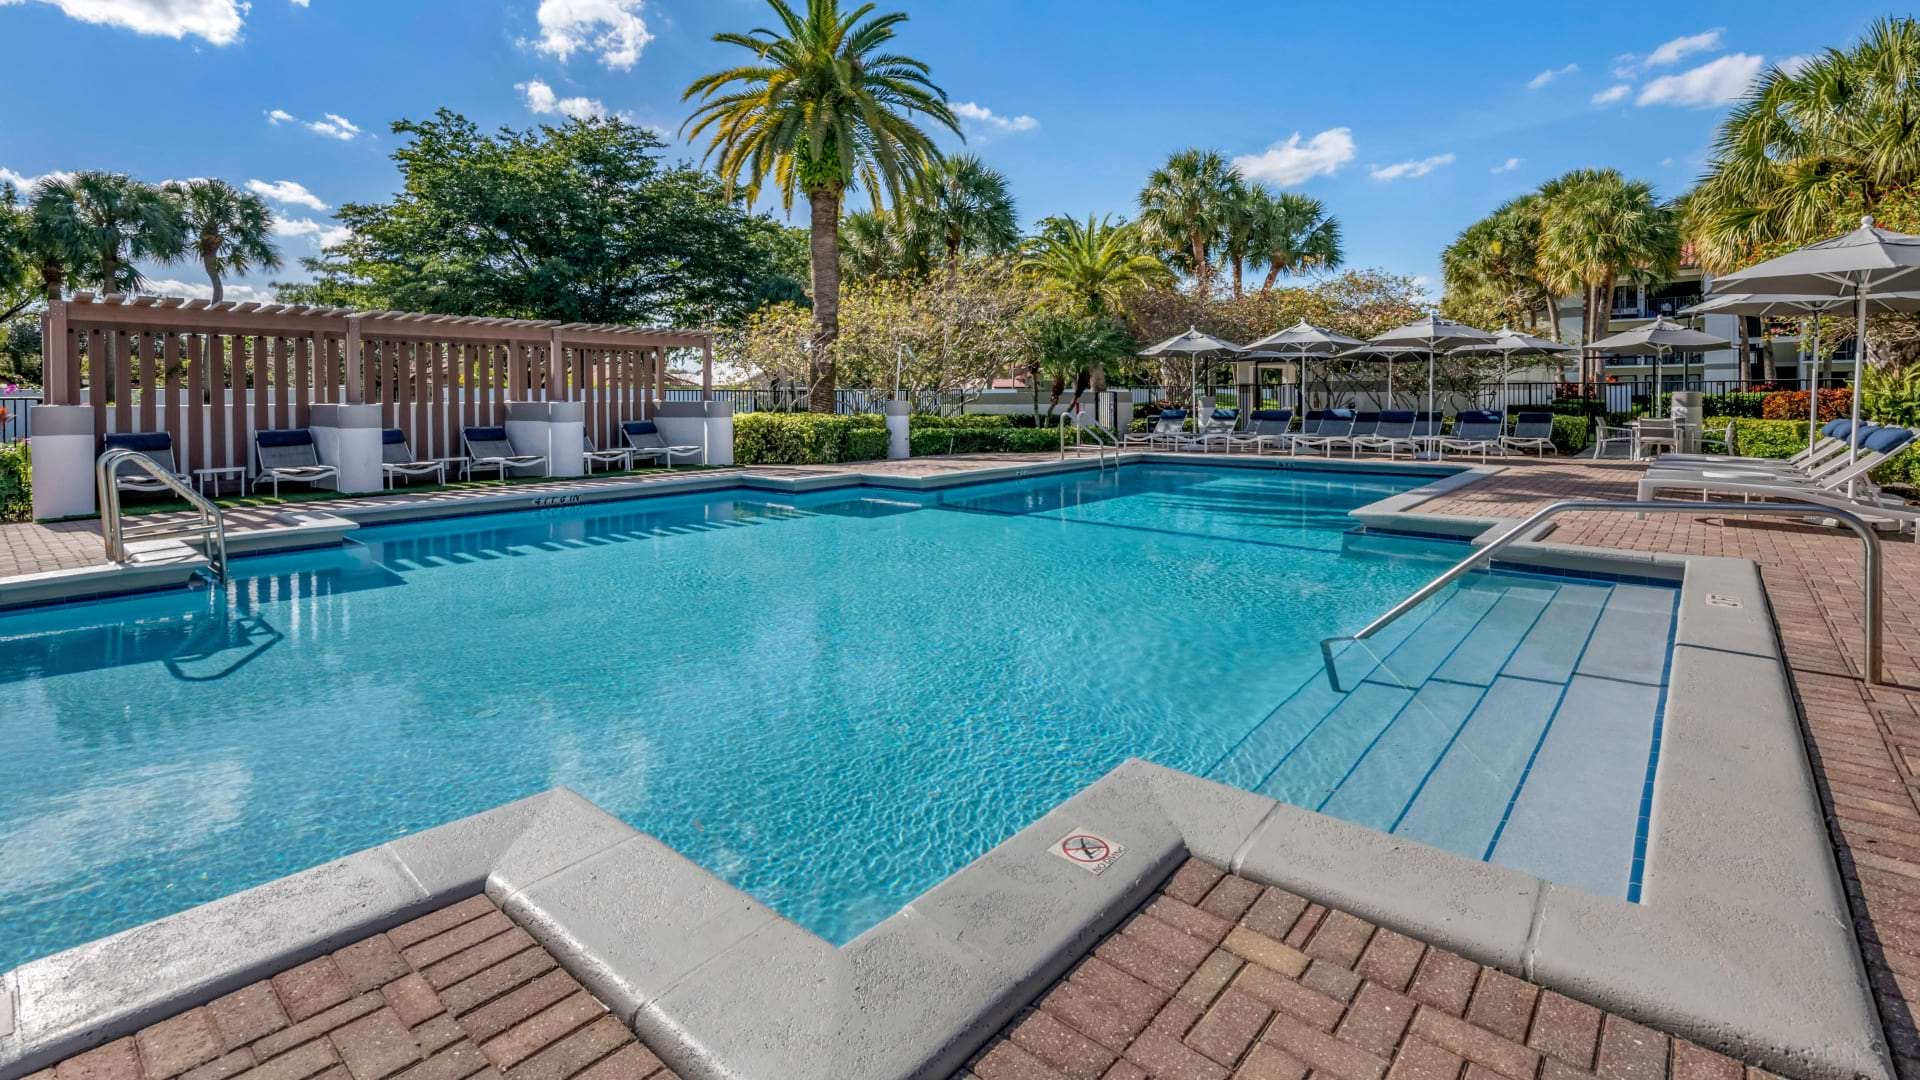 Sparkling, Resort-Style Pool at Our West Kendall Apartments in Miami, FL 